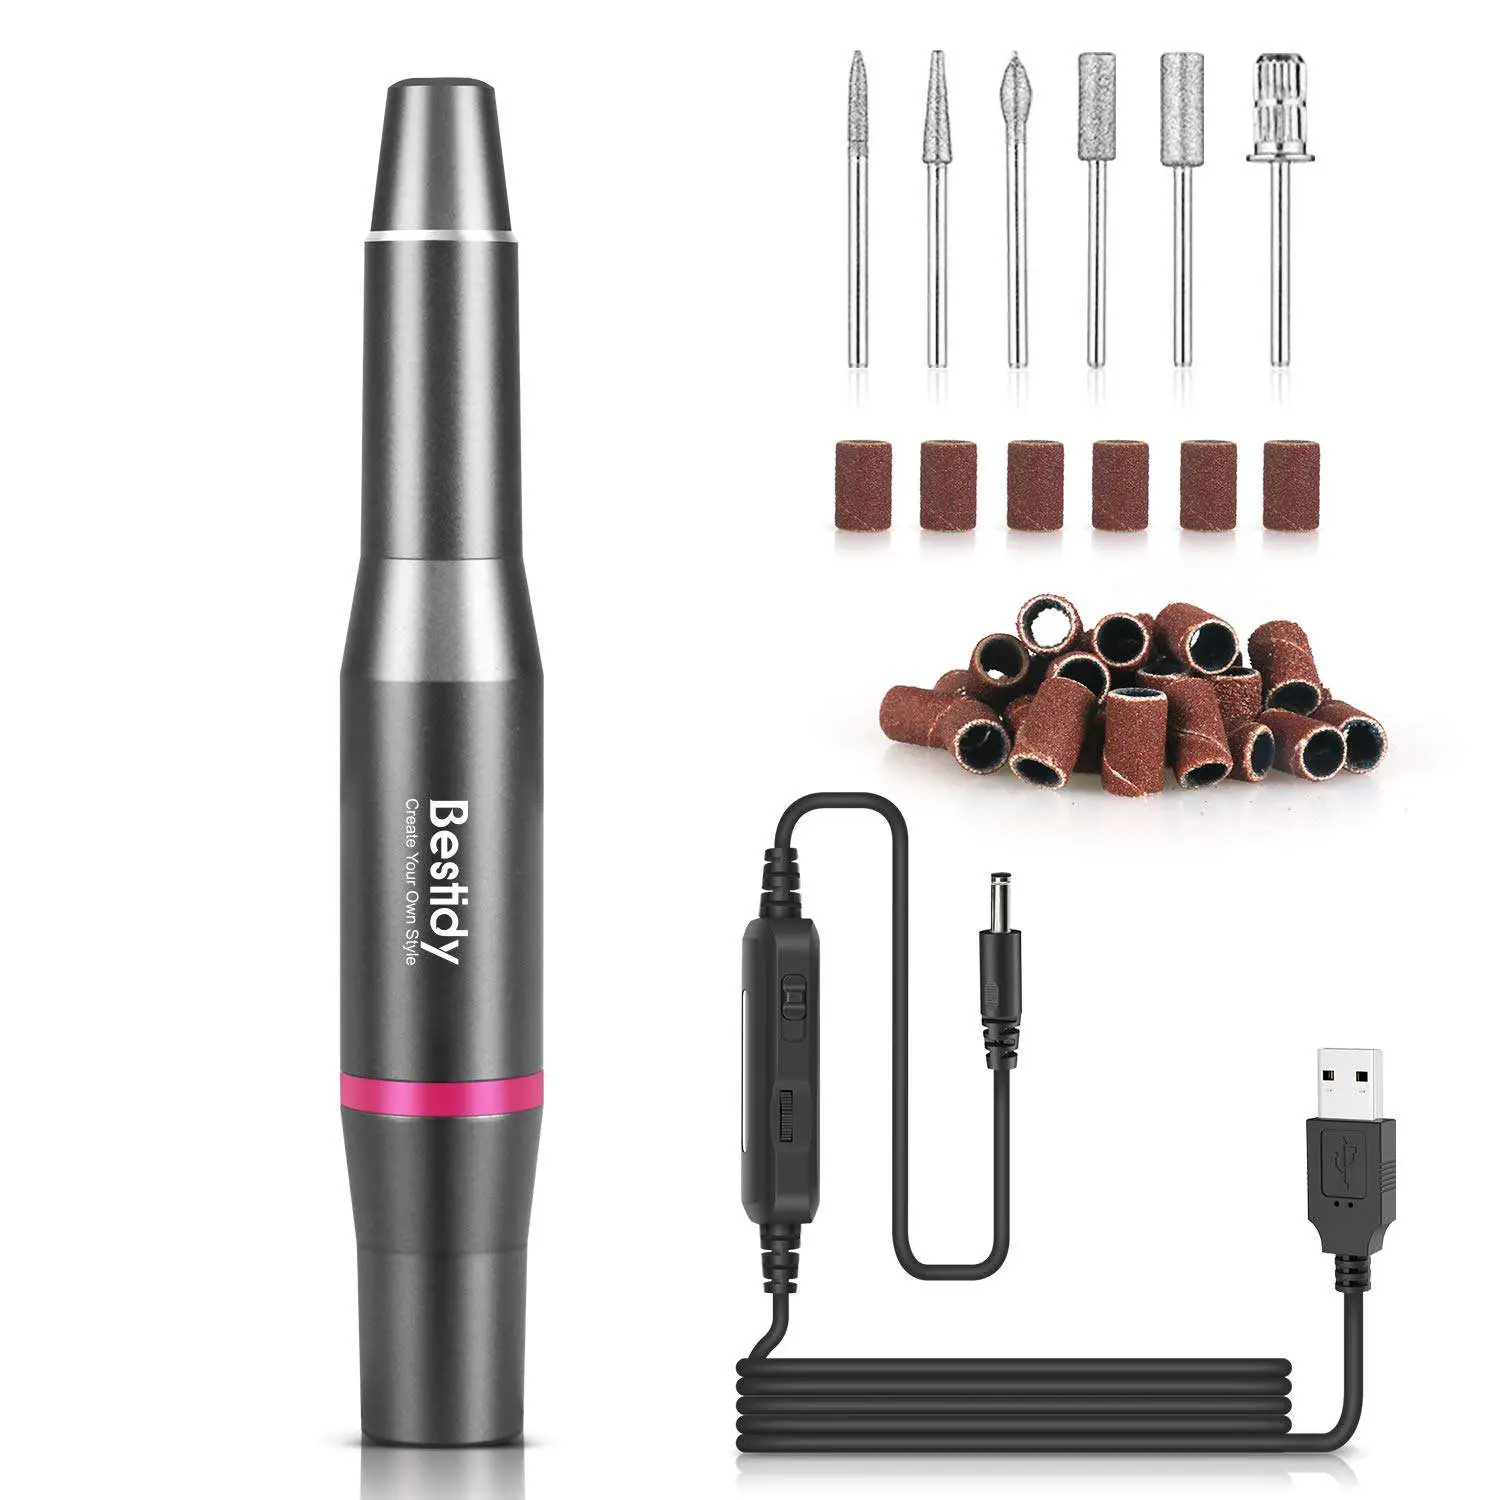 Top 10 Best Electric Nail Drills of 2019